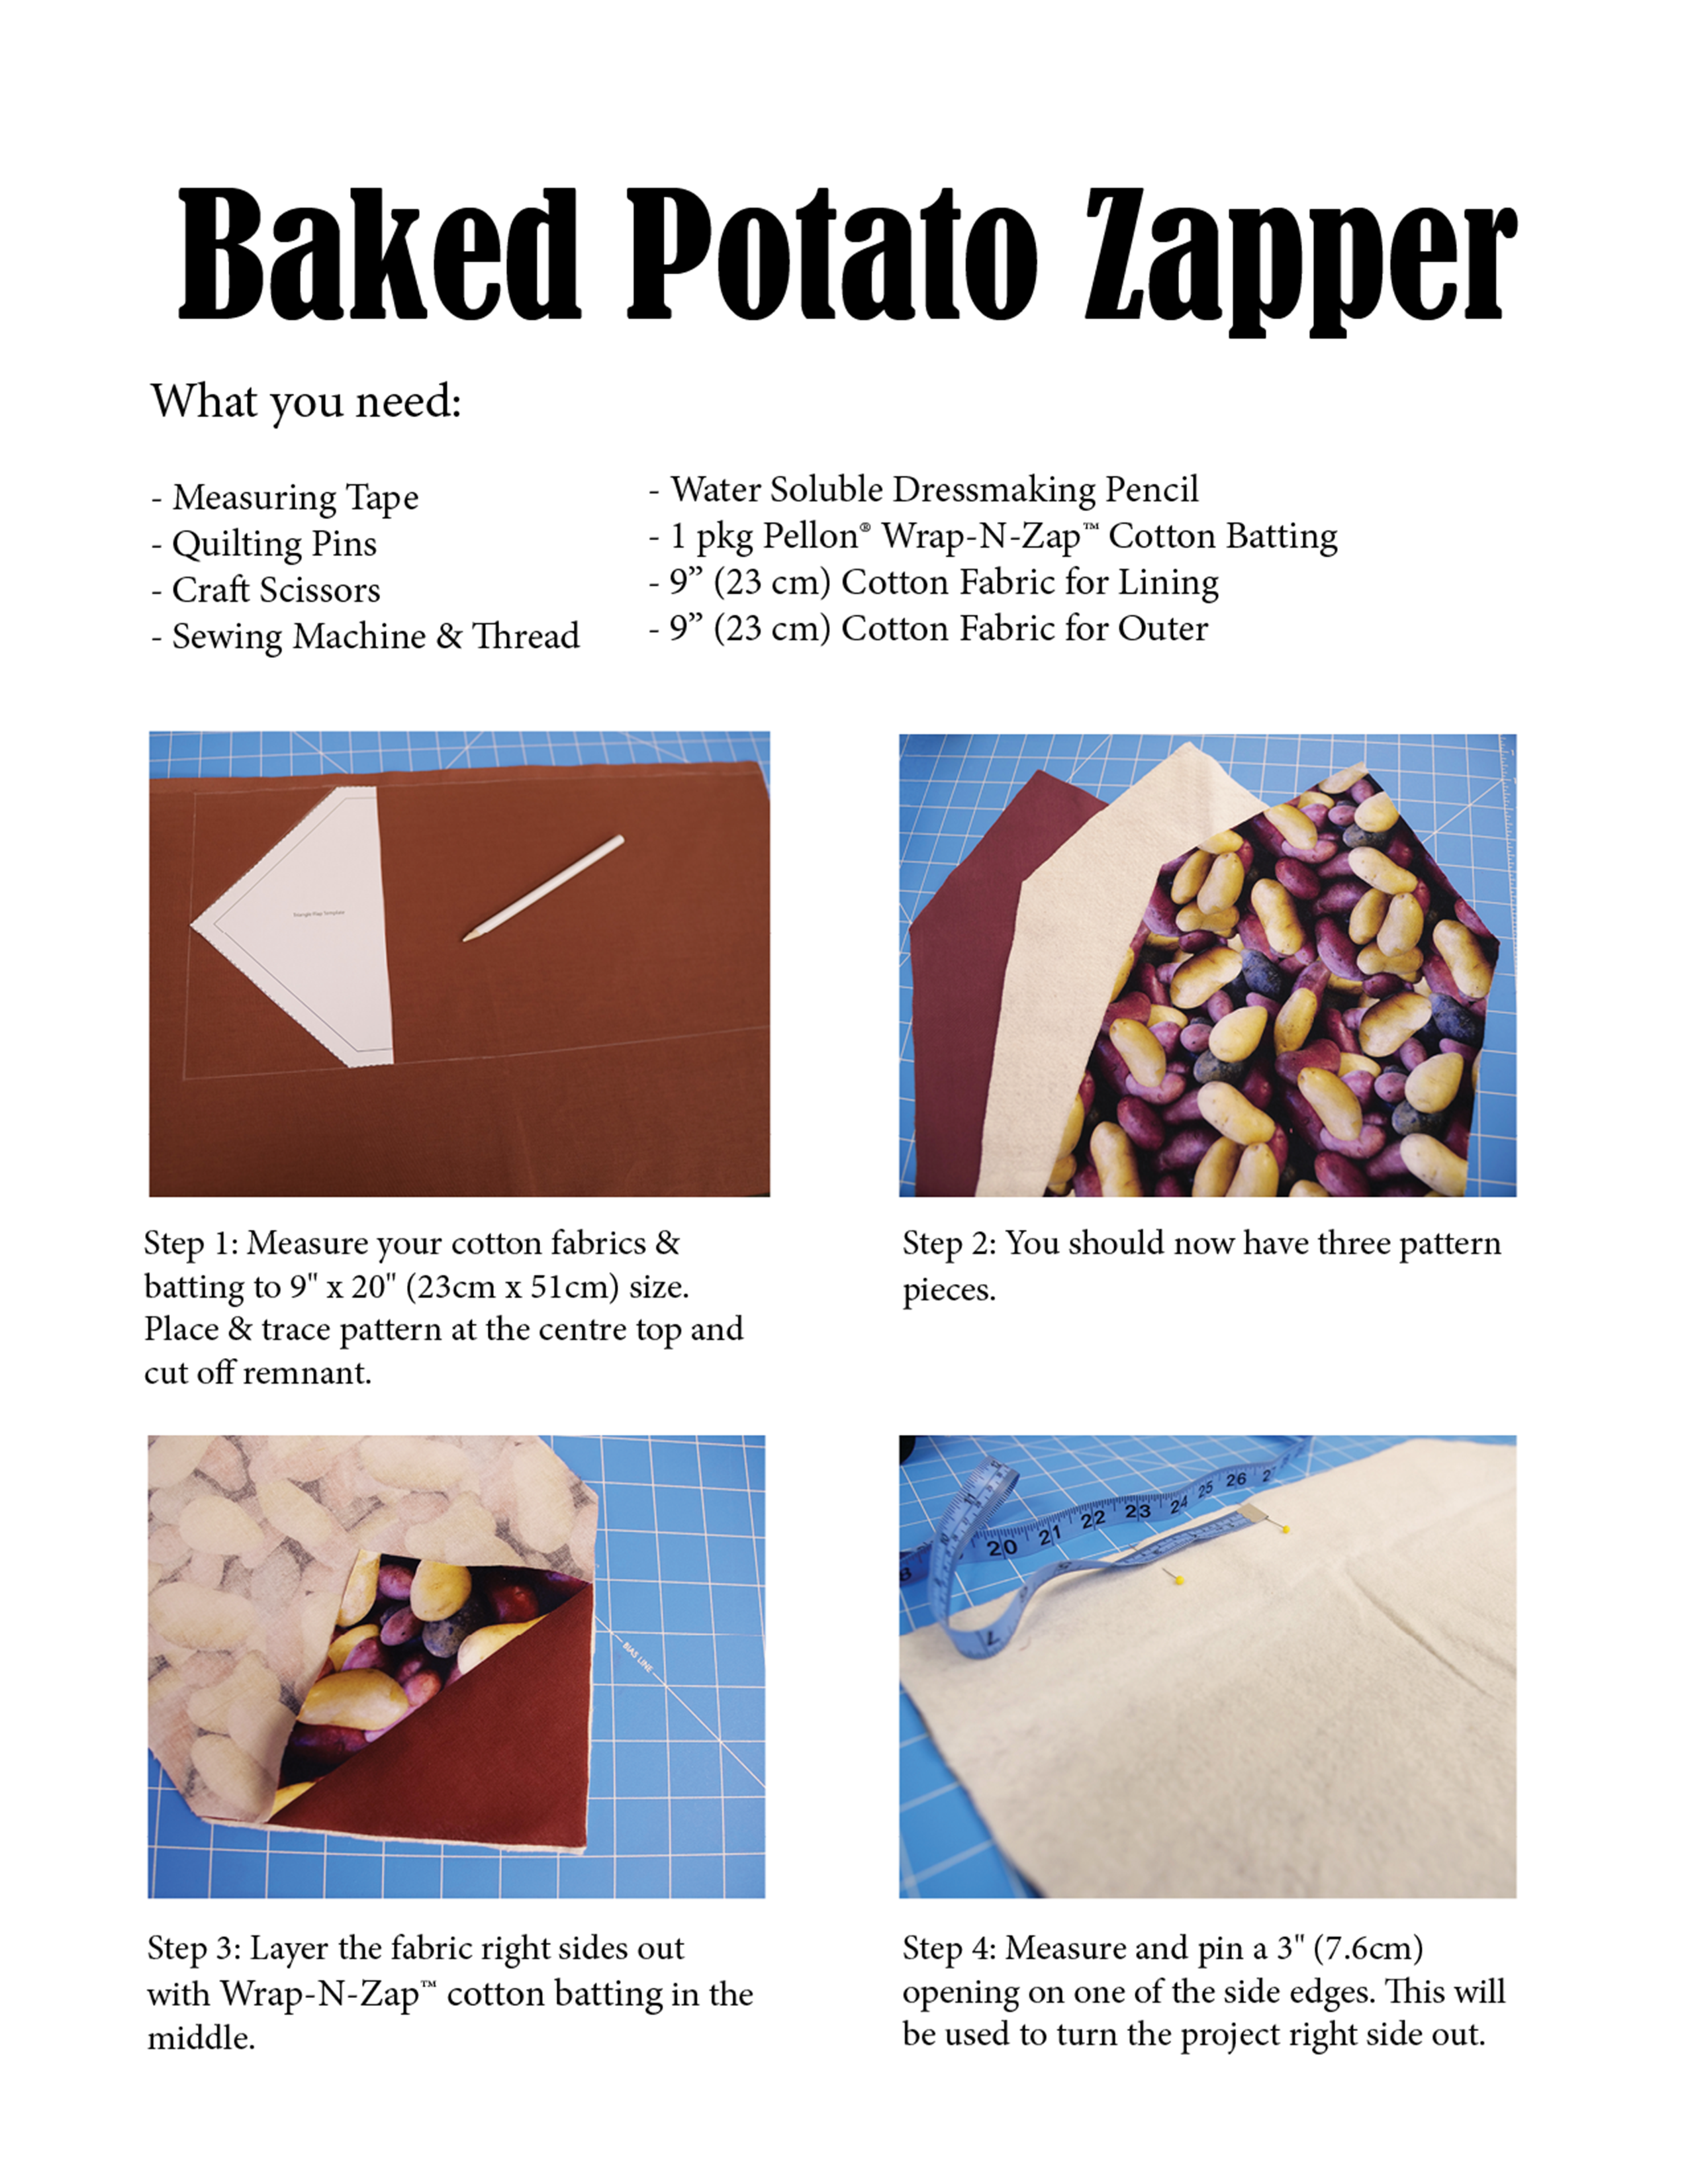 First set of steps to creating your own microwave potato bag